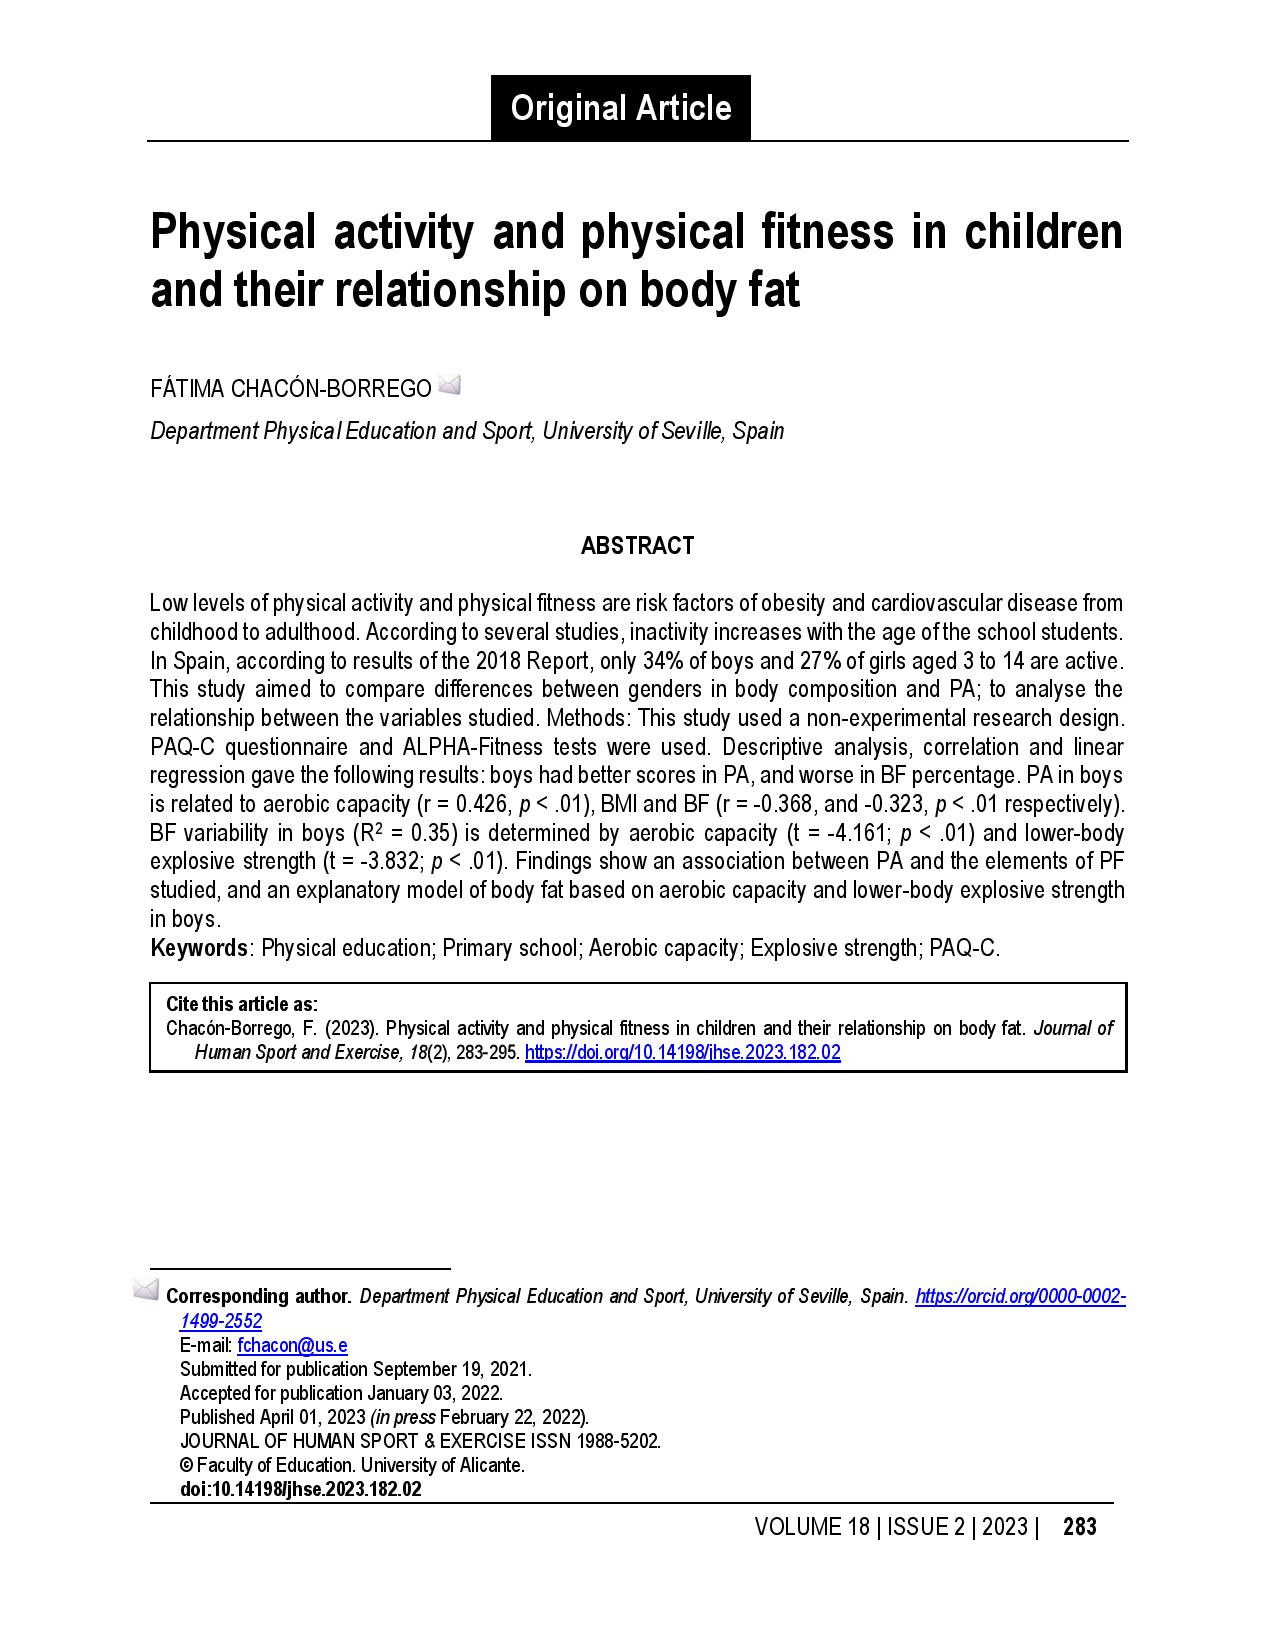 Physical activity and physical fitness in children and their relationship on body fat